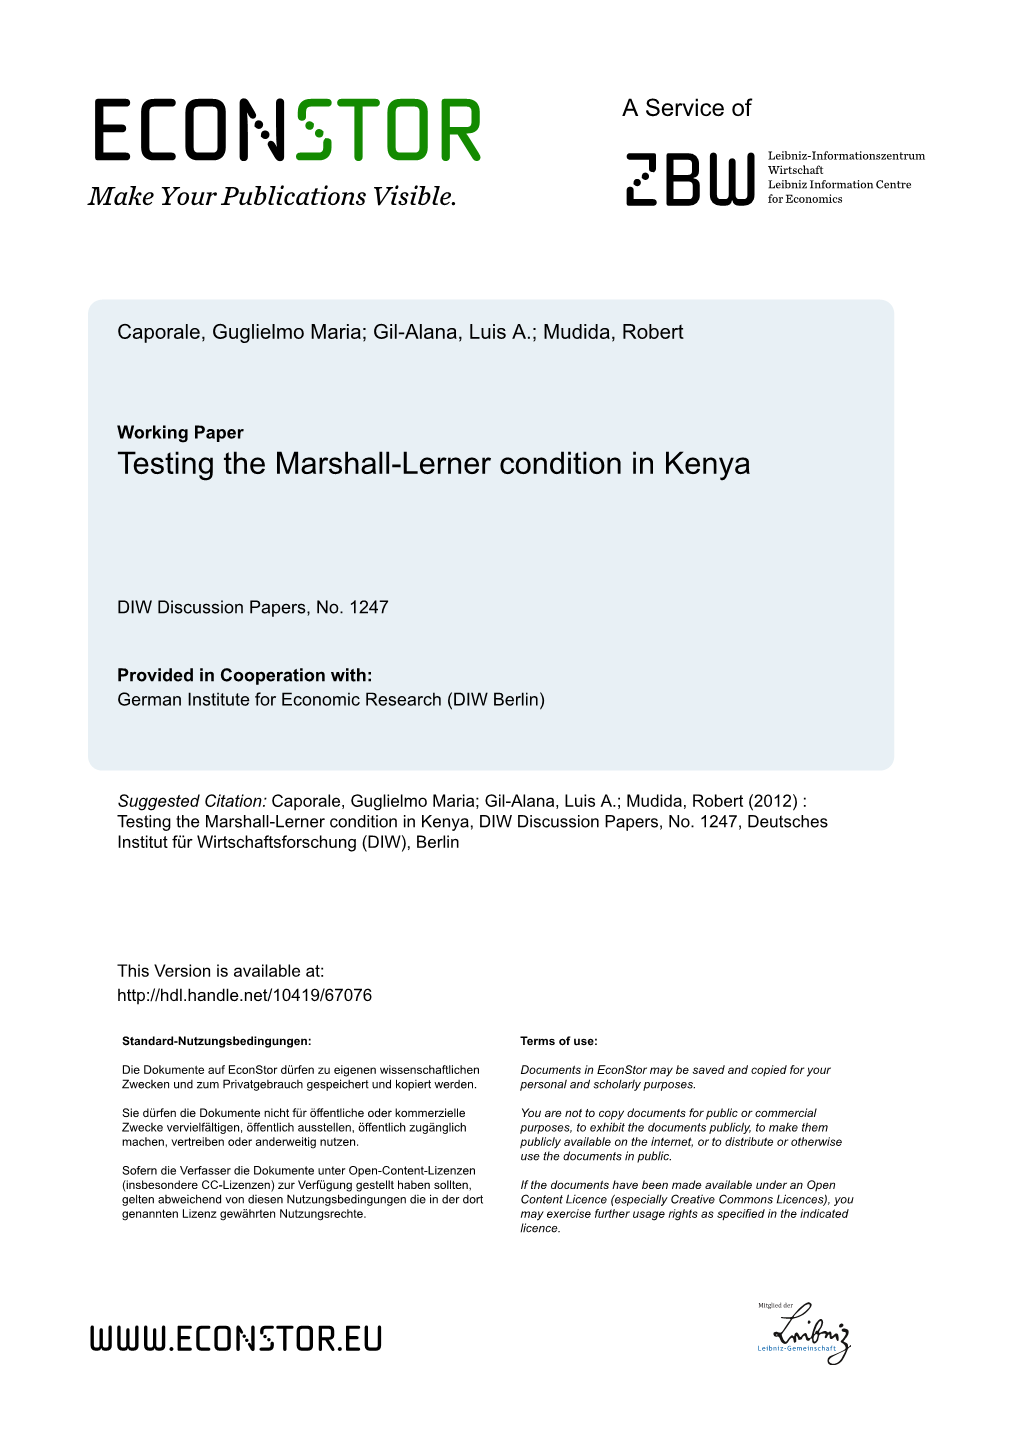 Testing the Marshall-Lerner Condition in Kenya